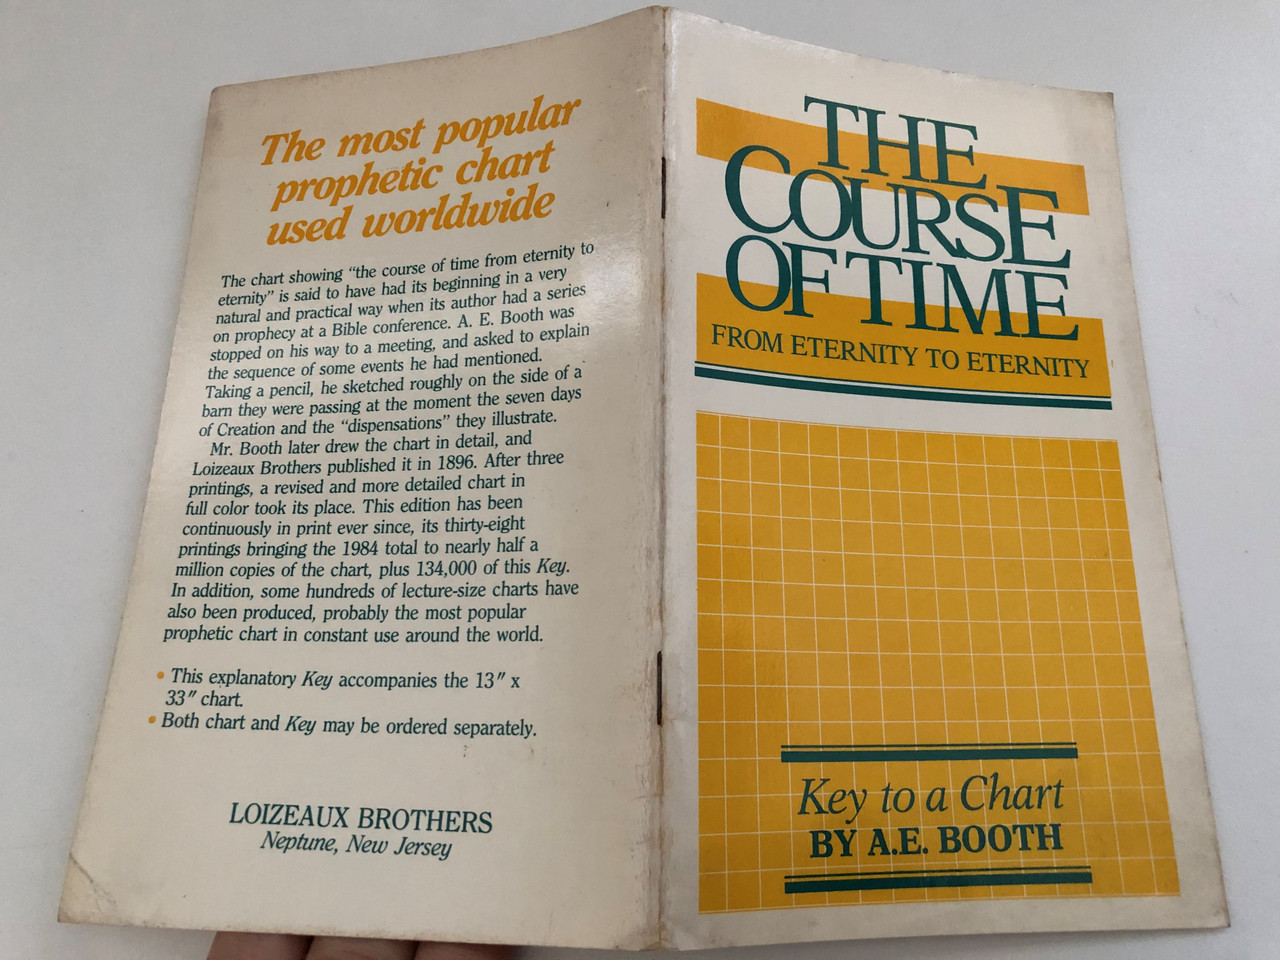 https://cdn10.bigcommerce.com/s-62bdpkt7pb/products/53517/images/271481/The_Course_of_Time_from_Eternity_to_Eternity_Key_to_a_Chart_by_A.E._BOOTH_Loizeaux_Brothers_Incorporated_Printed_in_the_United_States_of_America_872130747__94315.1680195404.1280.1280.JPG?c=2&_gl=1*91yxsi*_ga*MzA5MjcwMDY5LjE2Nzk3NDk1MDE.*_ga_WS2VZYPC6G*MTY4MDE3NjQ4NS41LjEuMTY4MDE5NTQwOS42MC4wLjA.